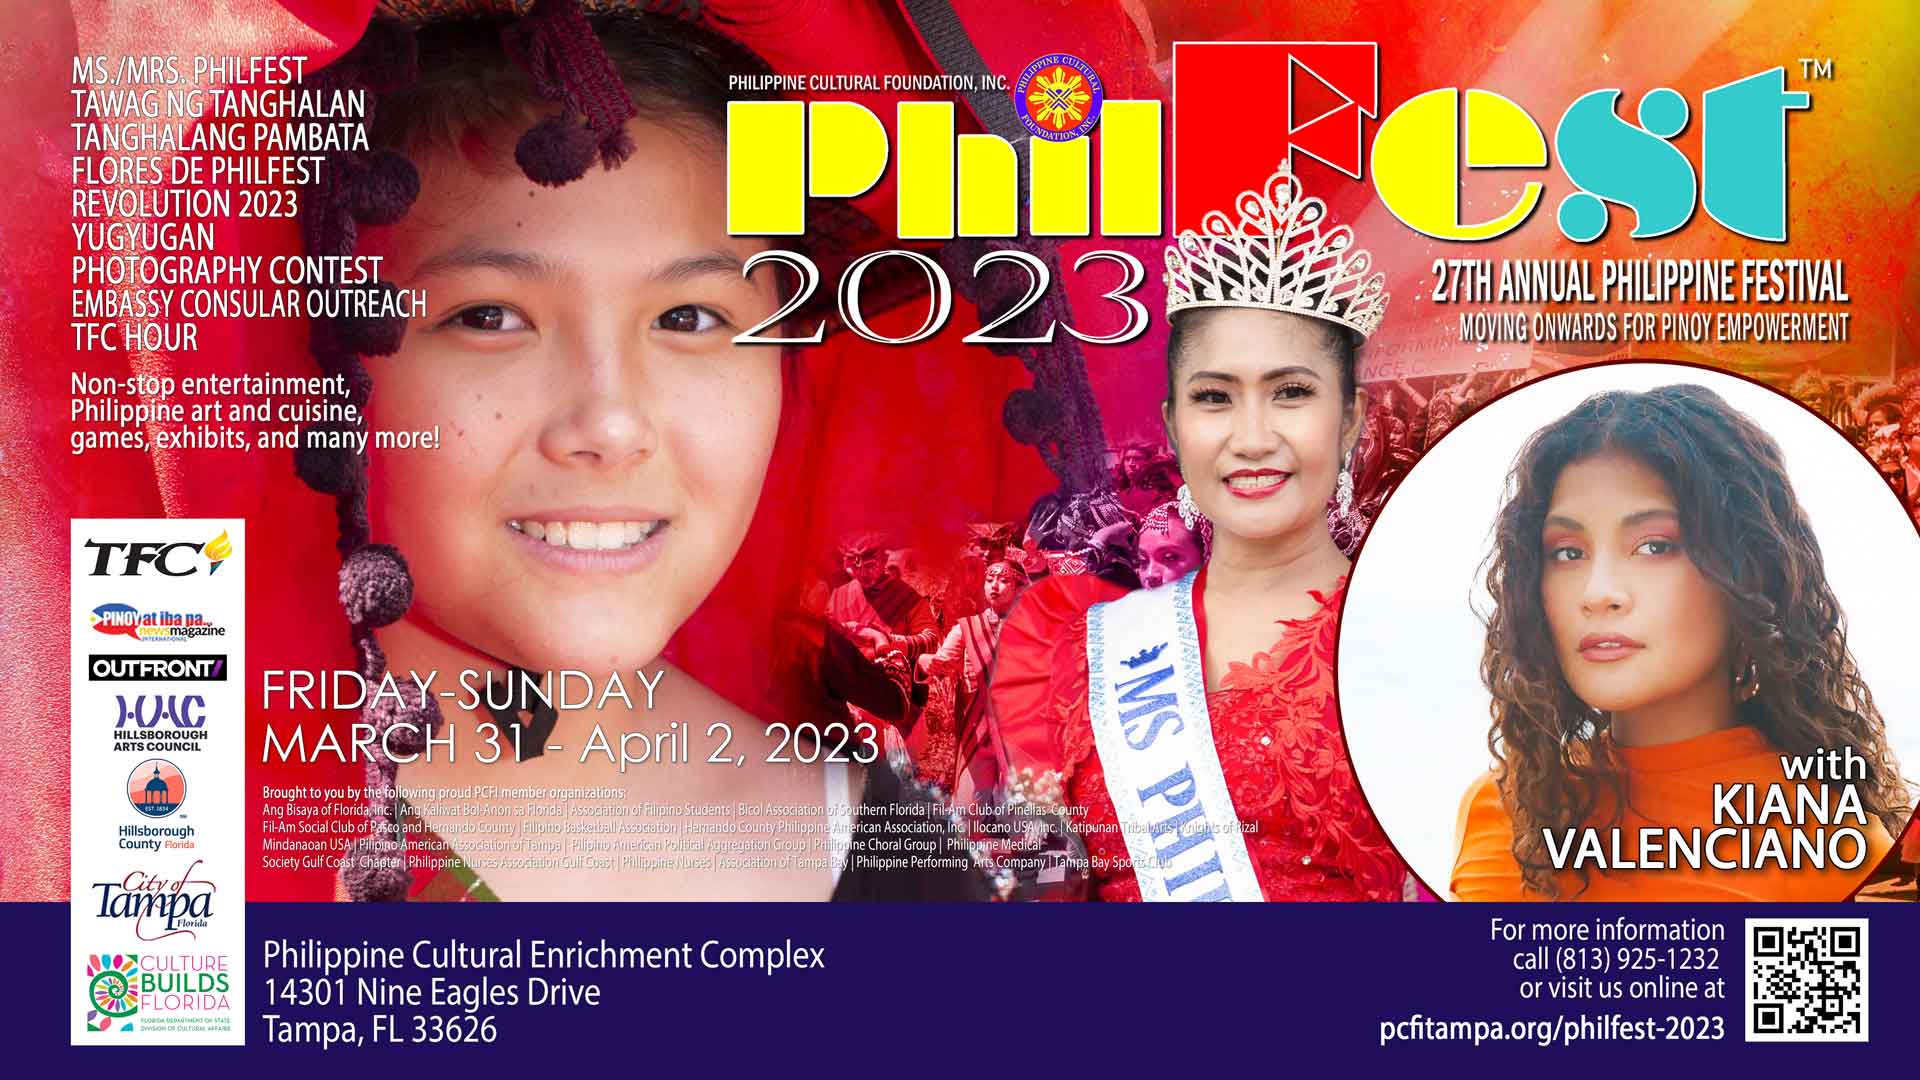 PhilFest 2023 Archives - Philippine Cultural Foundation, Inc.